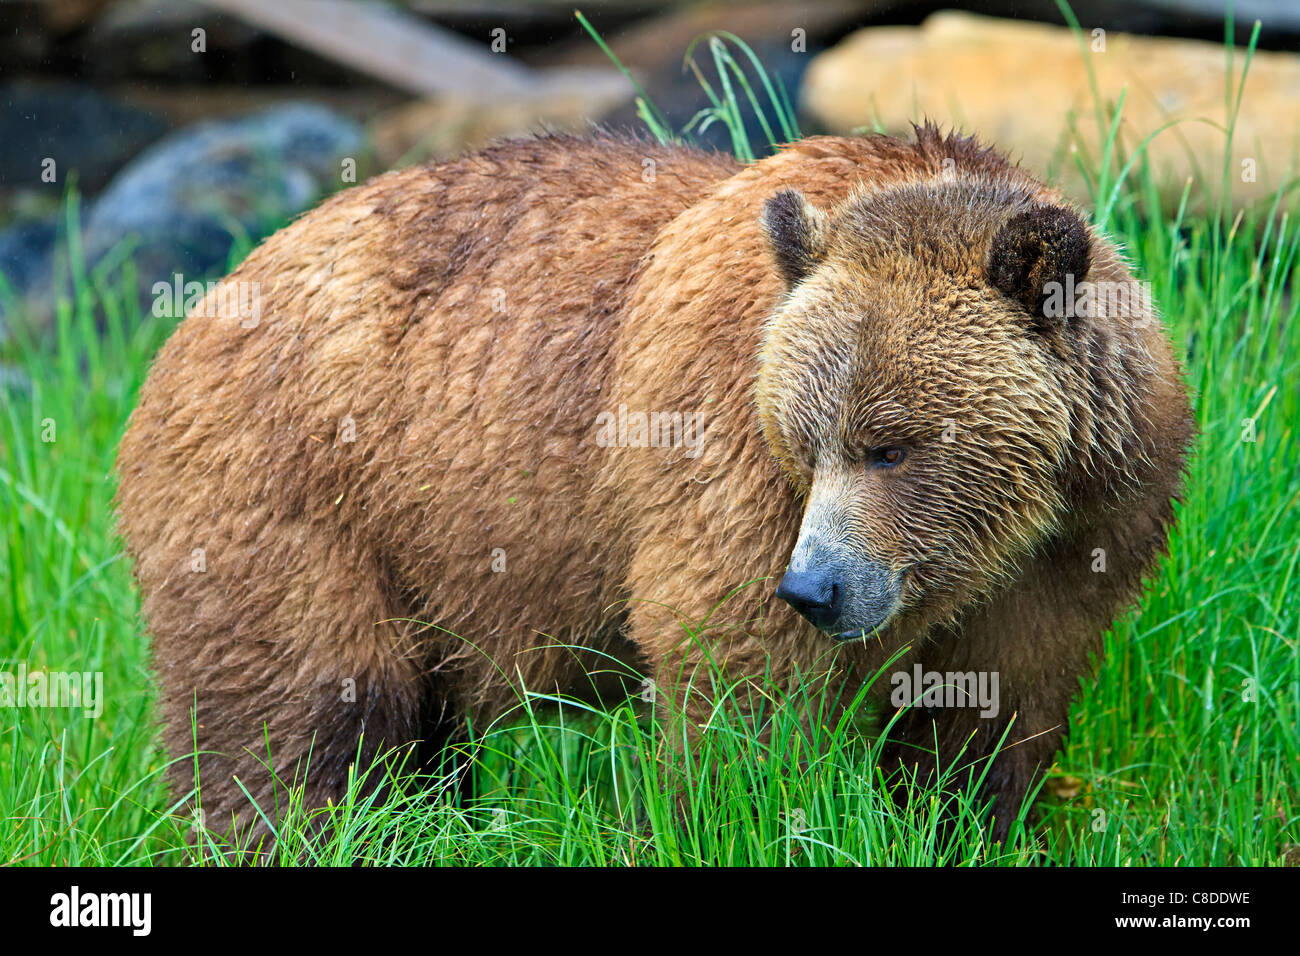 Coastal Grizzly bear foraging on a rainy day along the coast of British Columbia in the Great Bear Rainforest, Canada Stock Photo